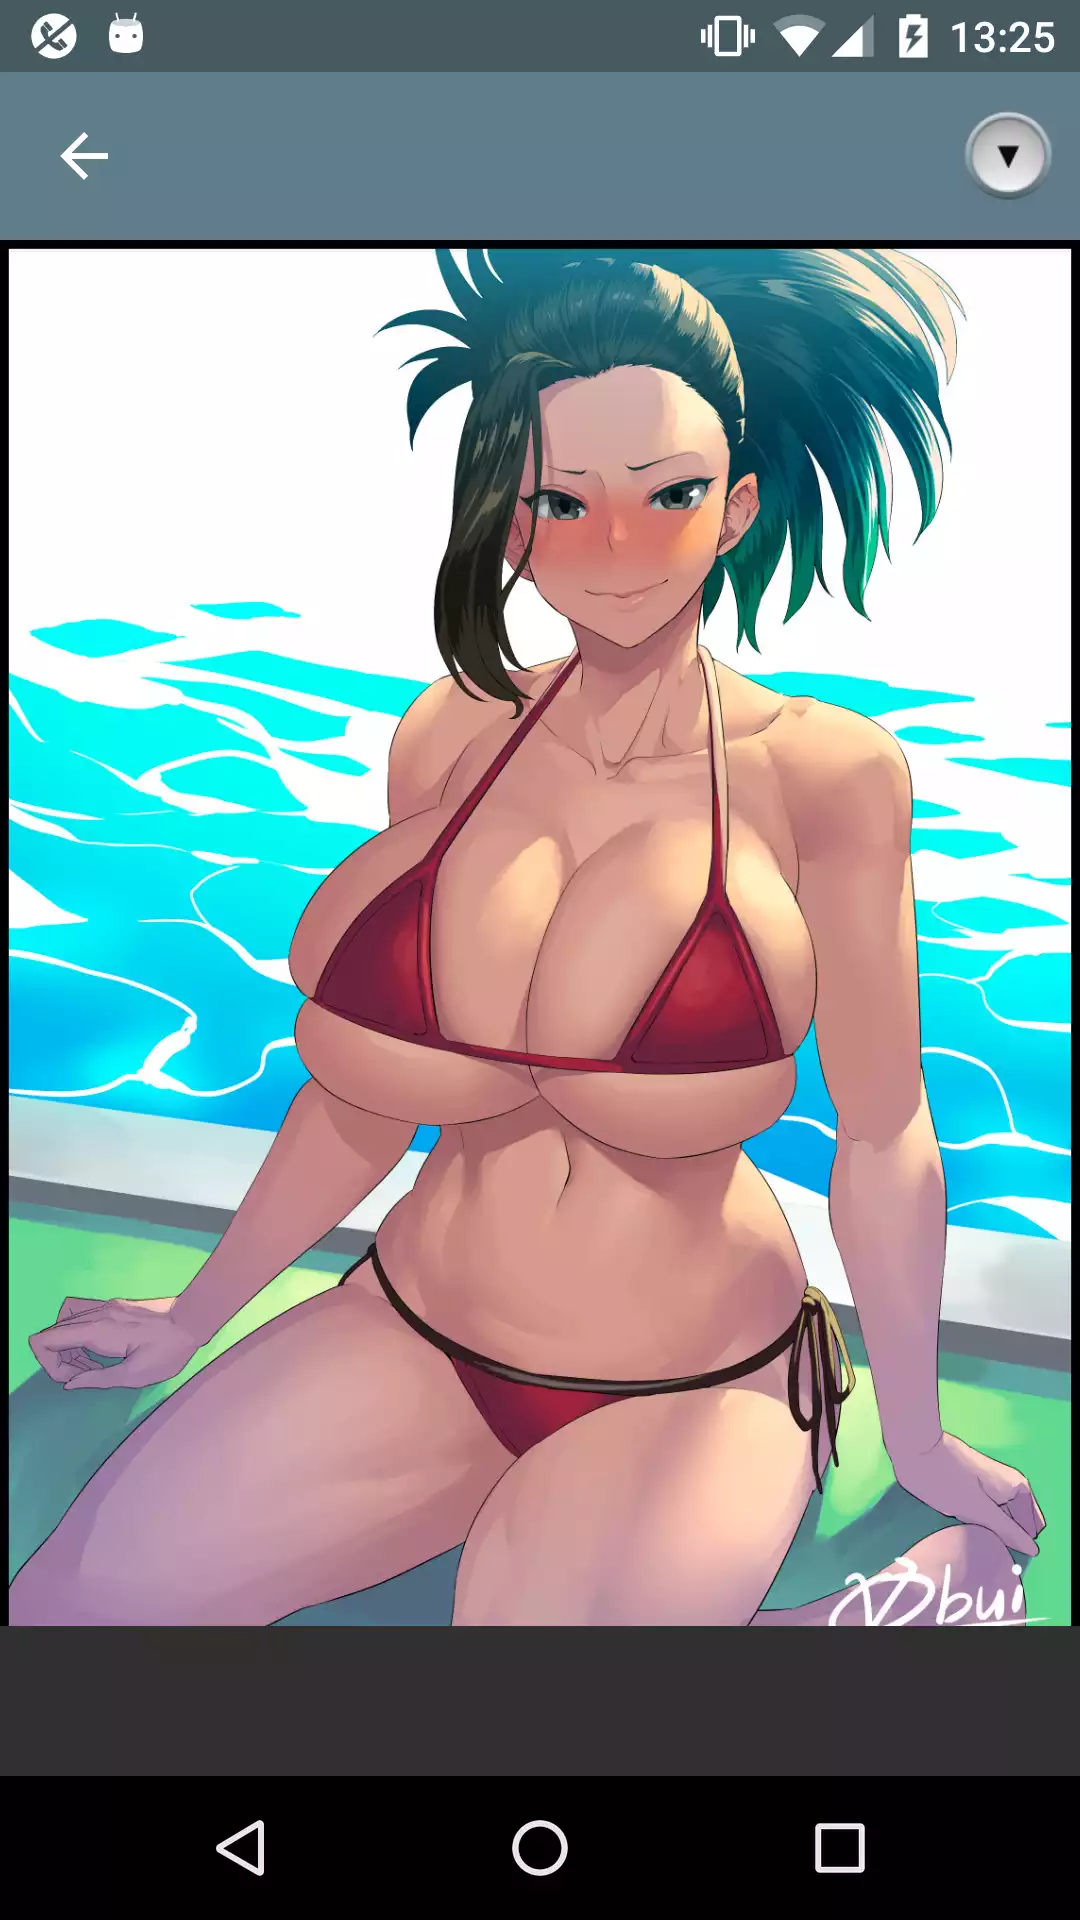 Hentai pics android,download,photos,hot,adult,pic,lane,hentai,pictures,hentail,sexy,anime,manga,apk,lily,app,images,apps,lair,for,henati,pica,pornstar,pics,mythras,erotic